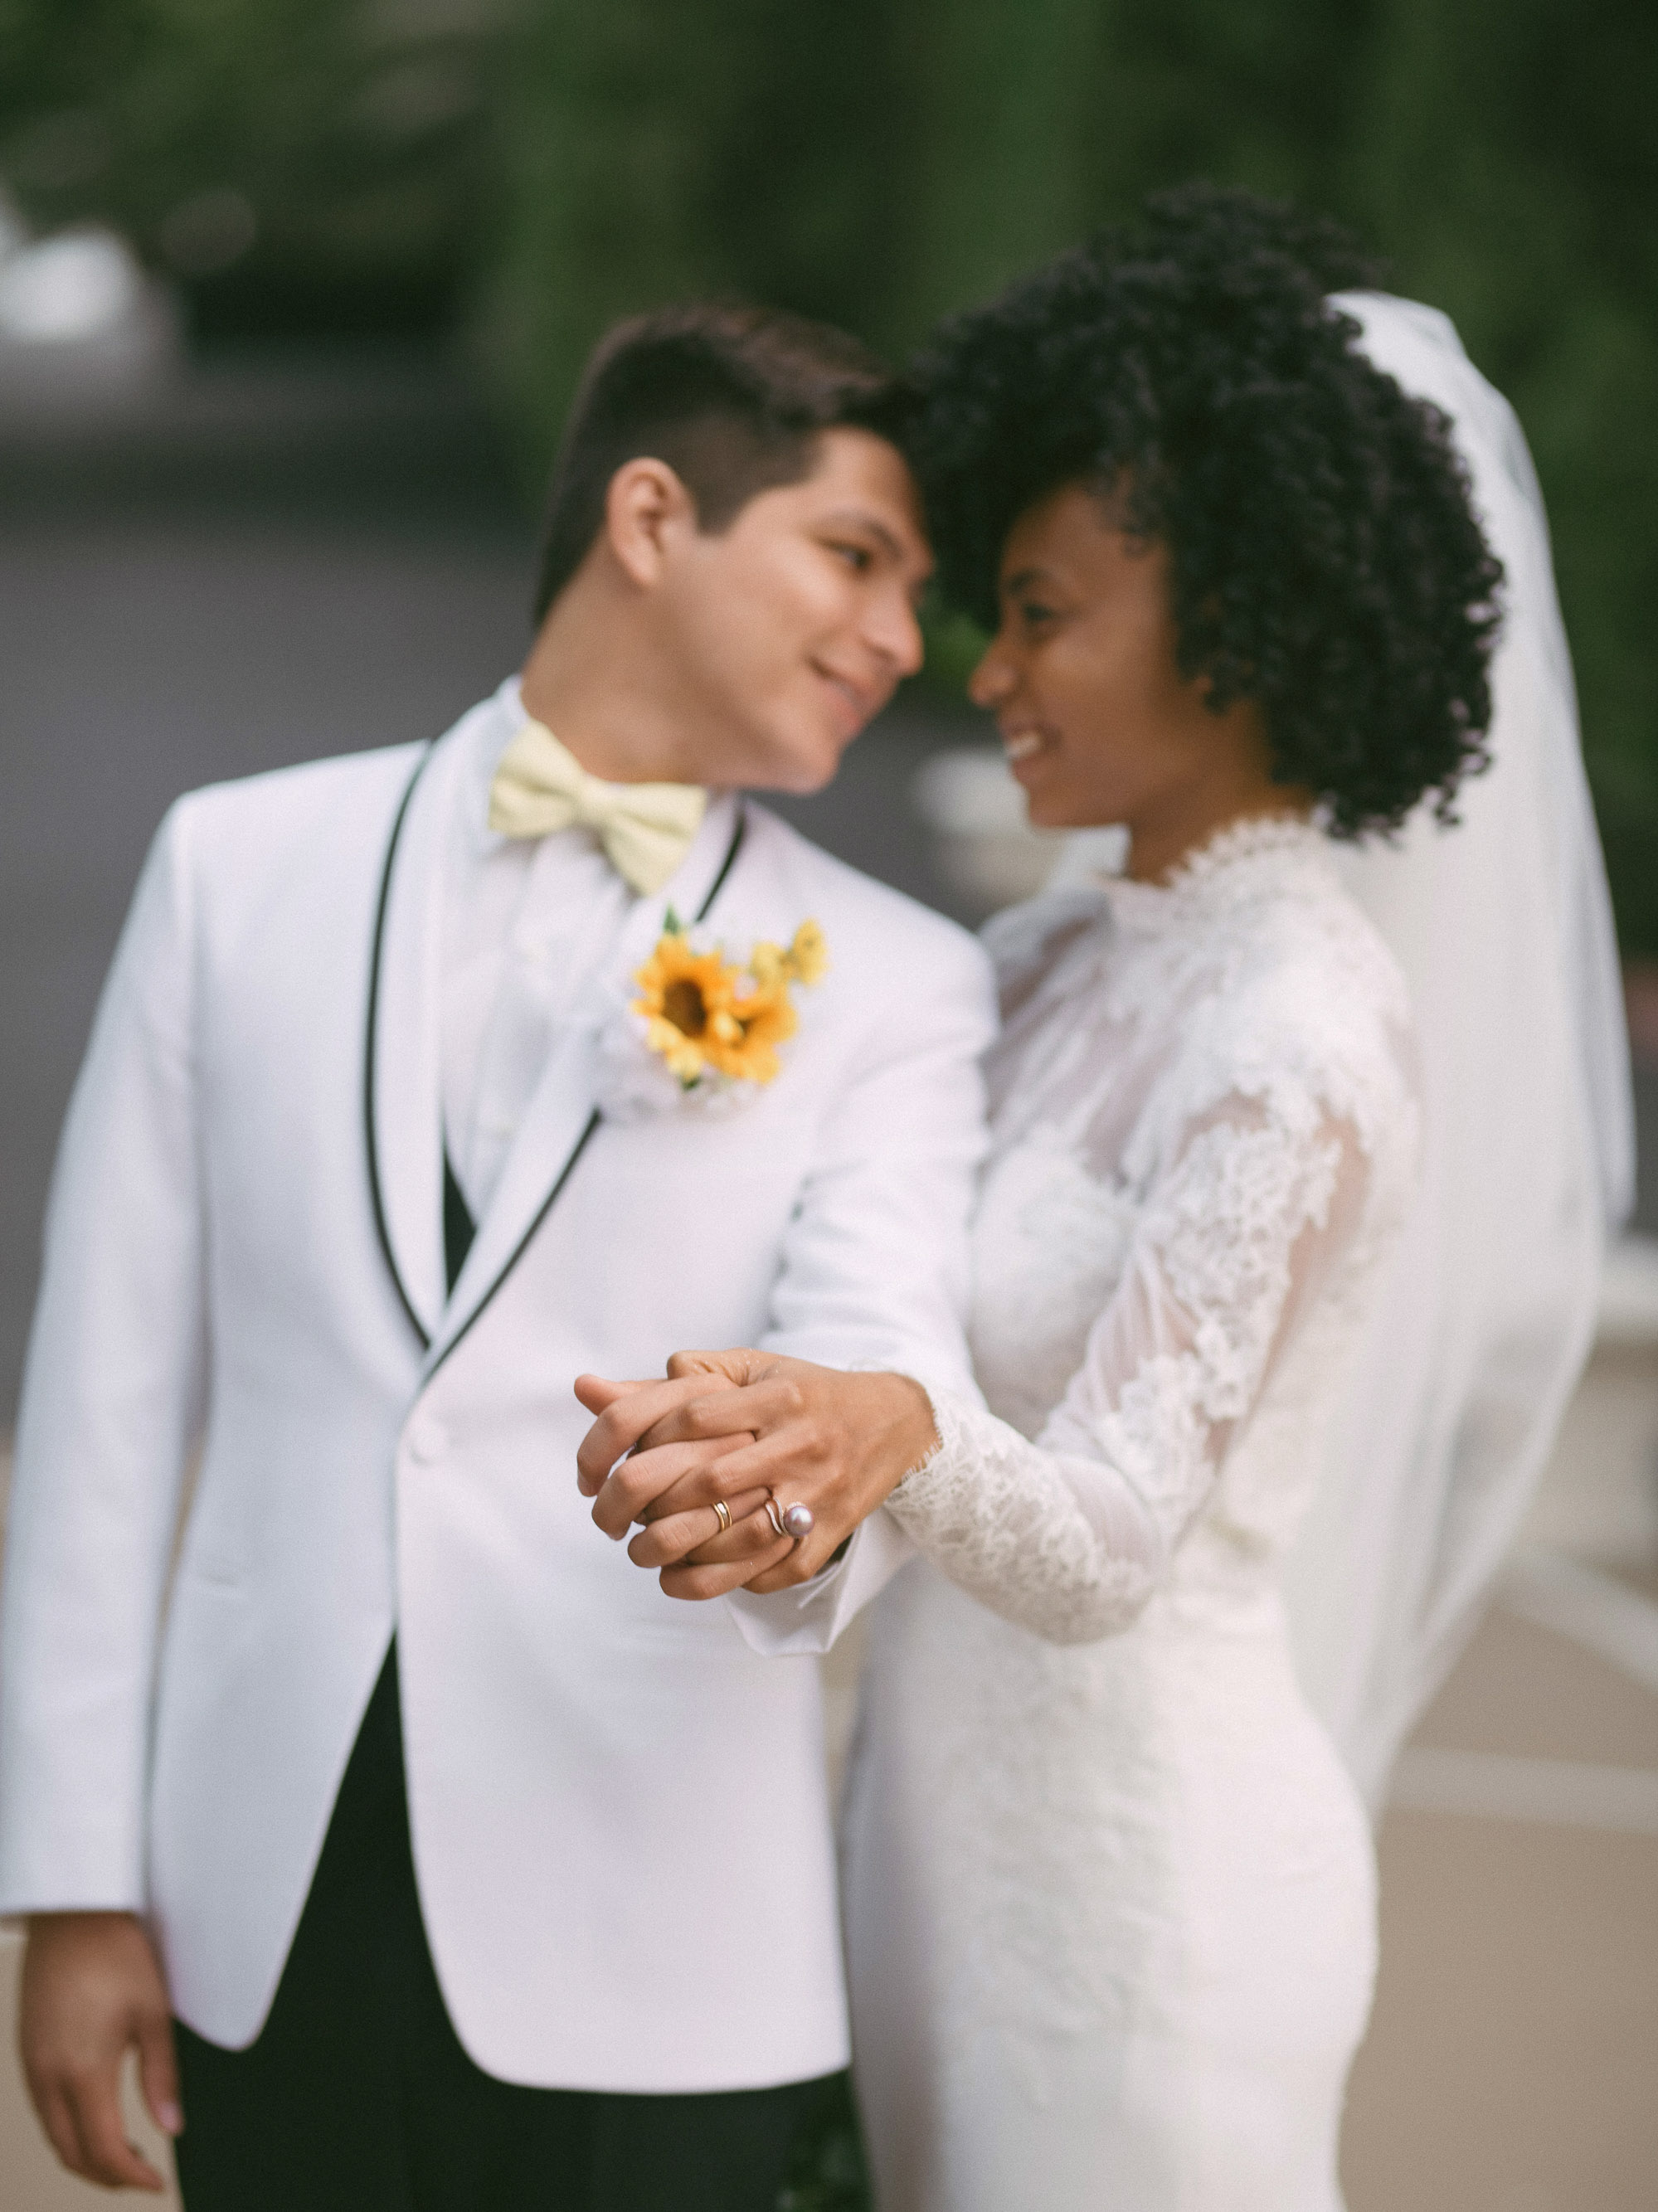 A bride and groom in a white tuxedo holding hands.